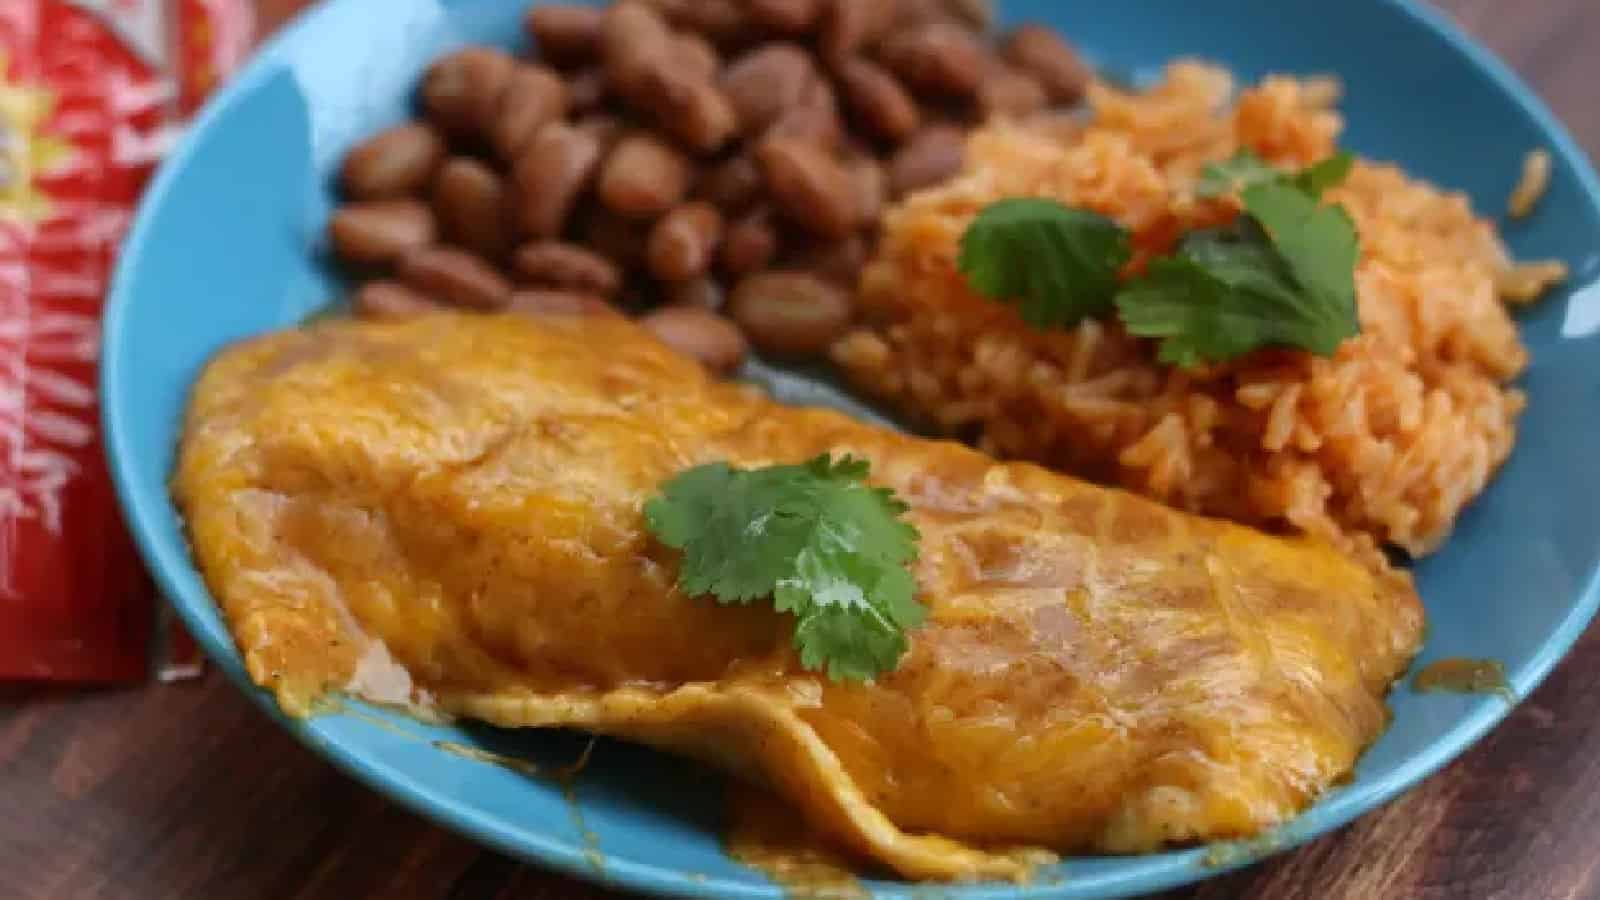 Blue plate with a cheese enchilada, rice, and beans.